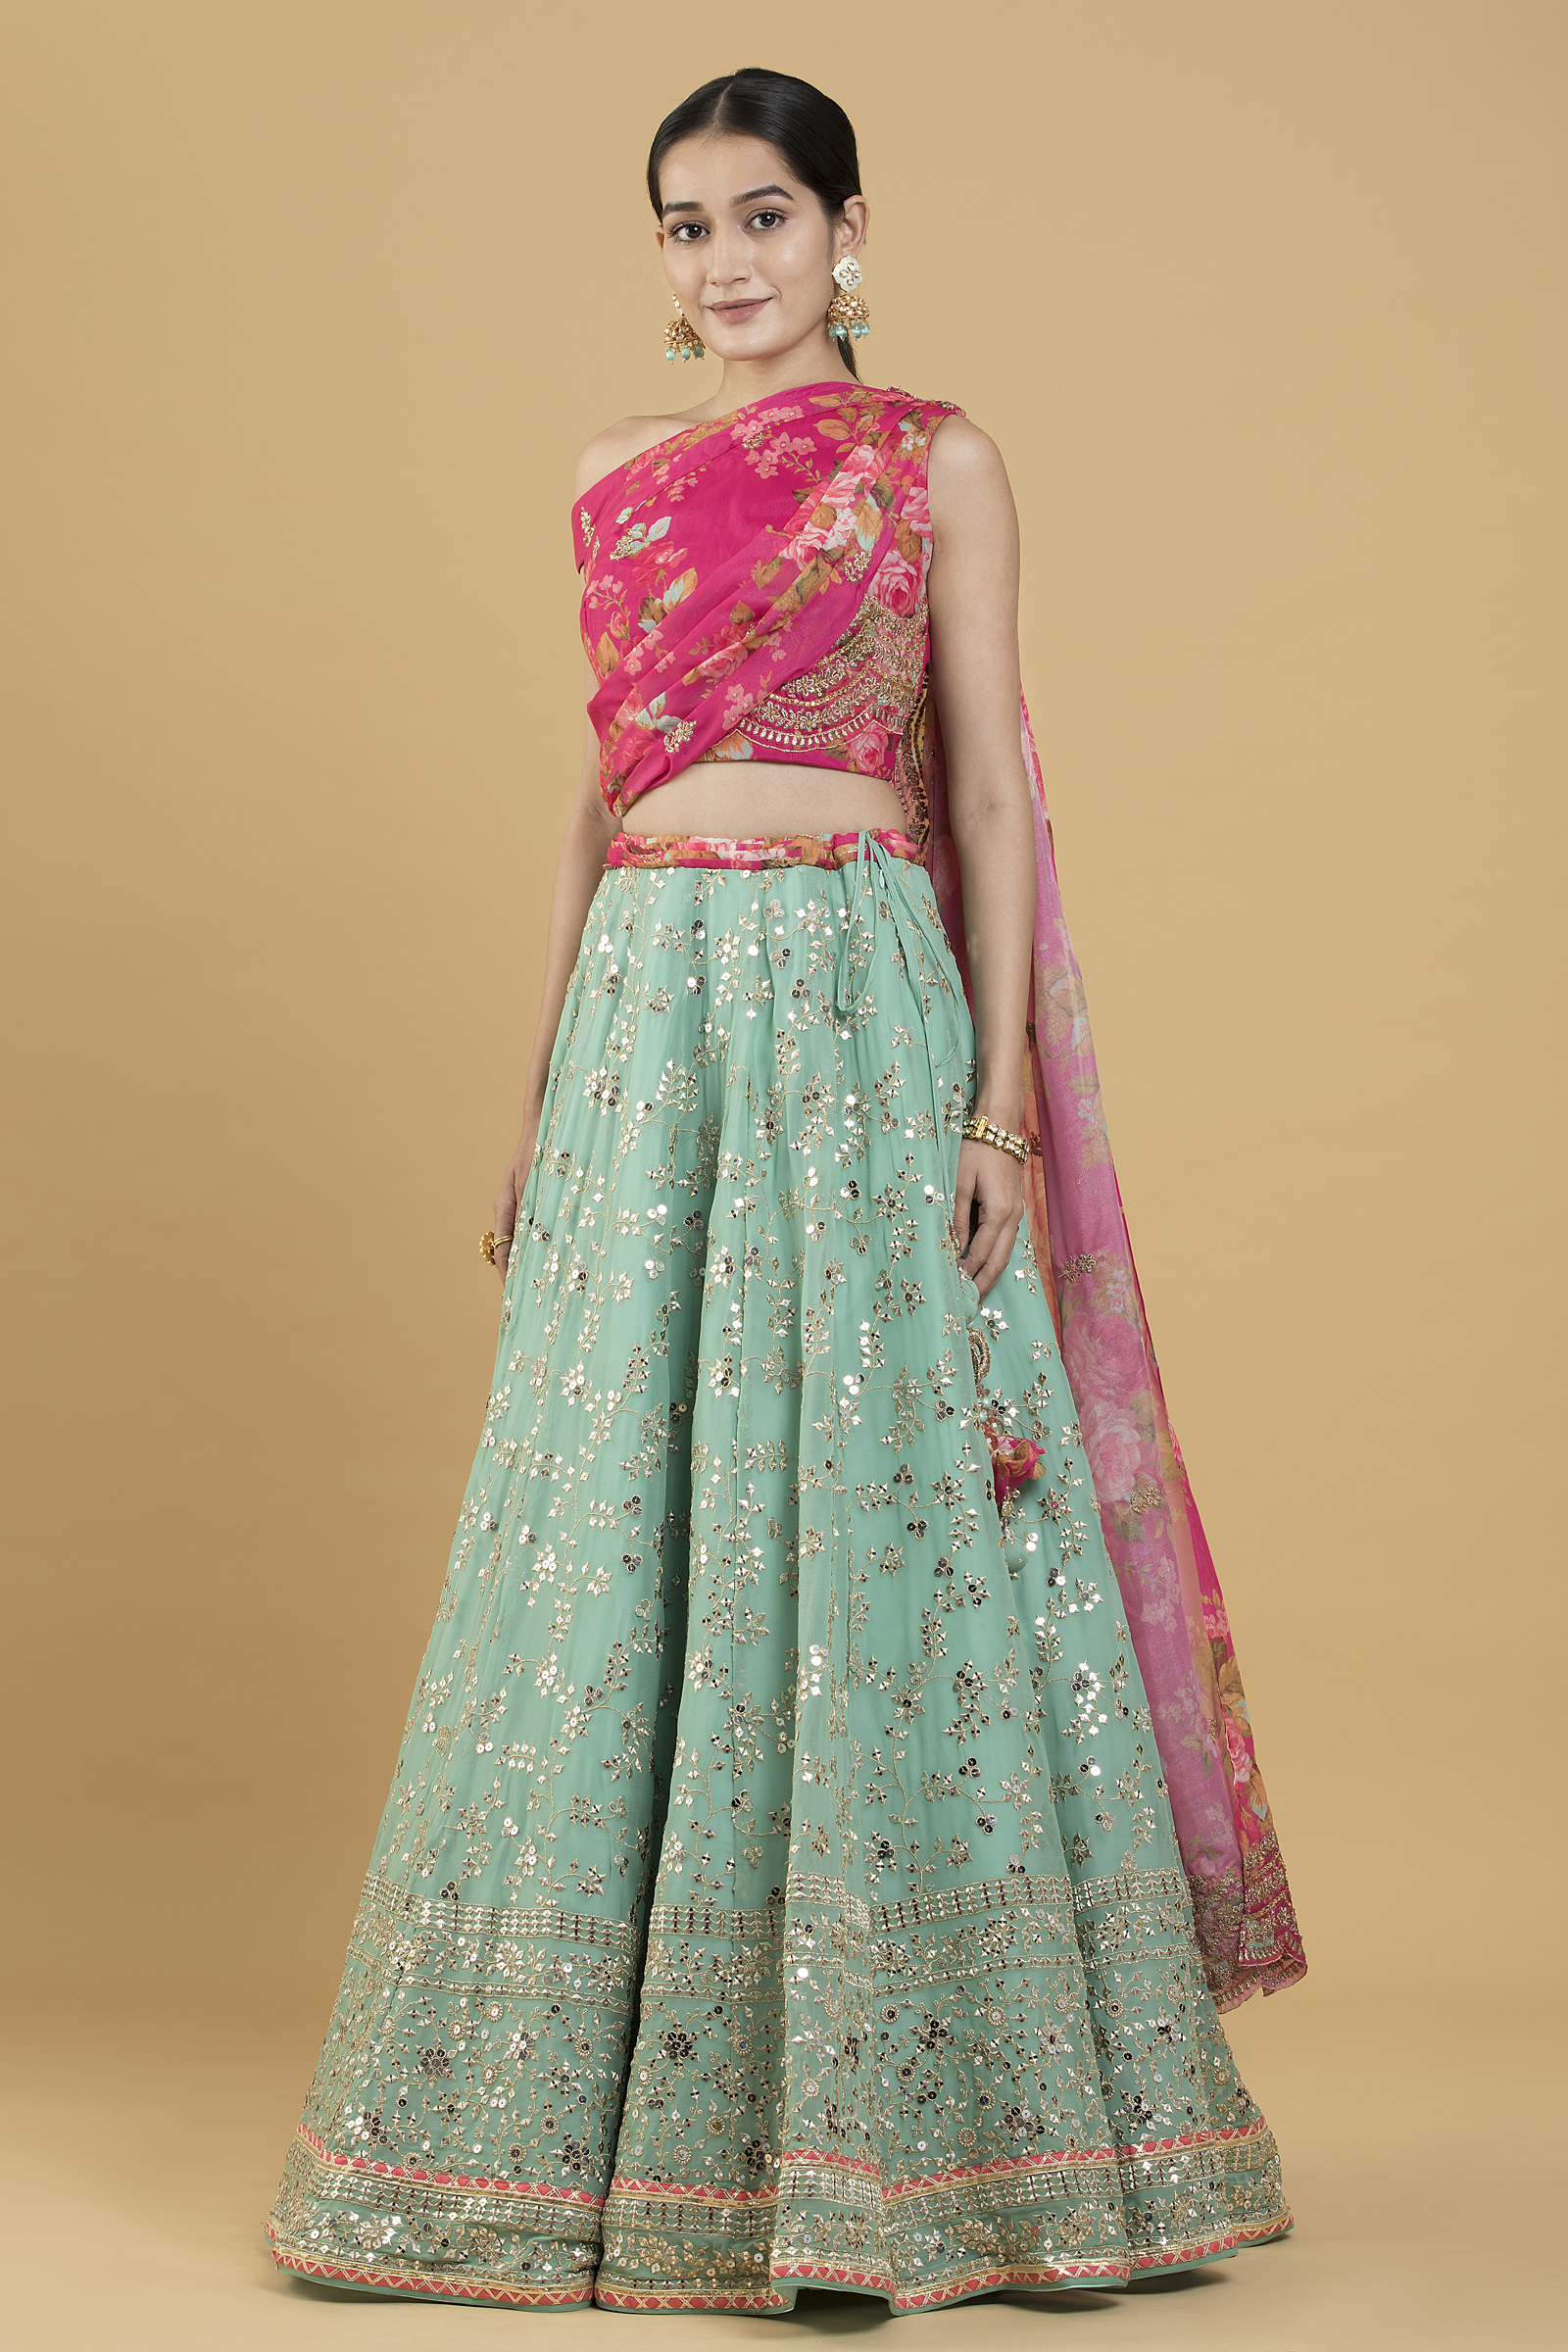 Green brocade lehenga with a pink blouse and purple dupatta. | Indian  bridal outfits, Indian dresses, Women's fashion dresses